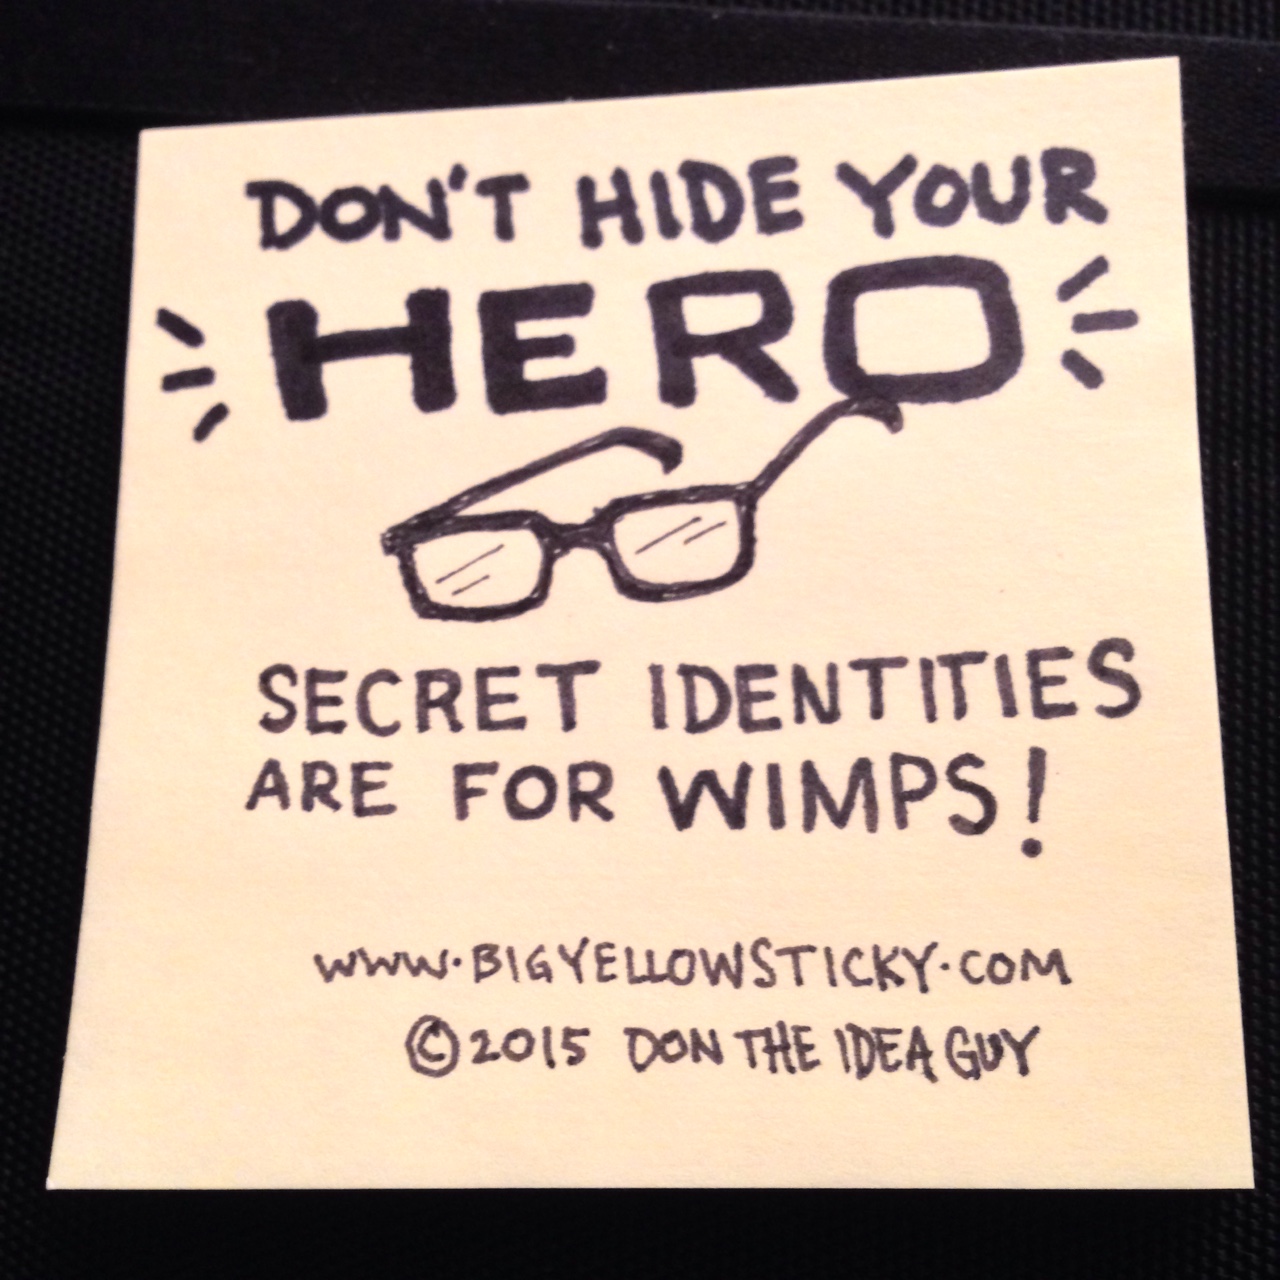 Secret identities are for wimps